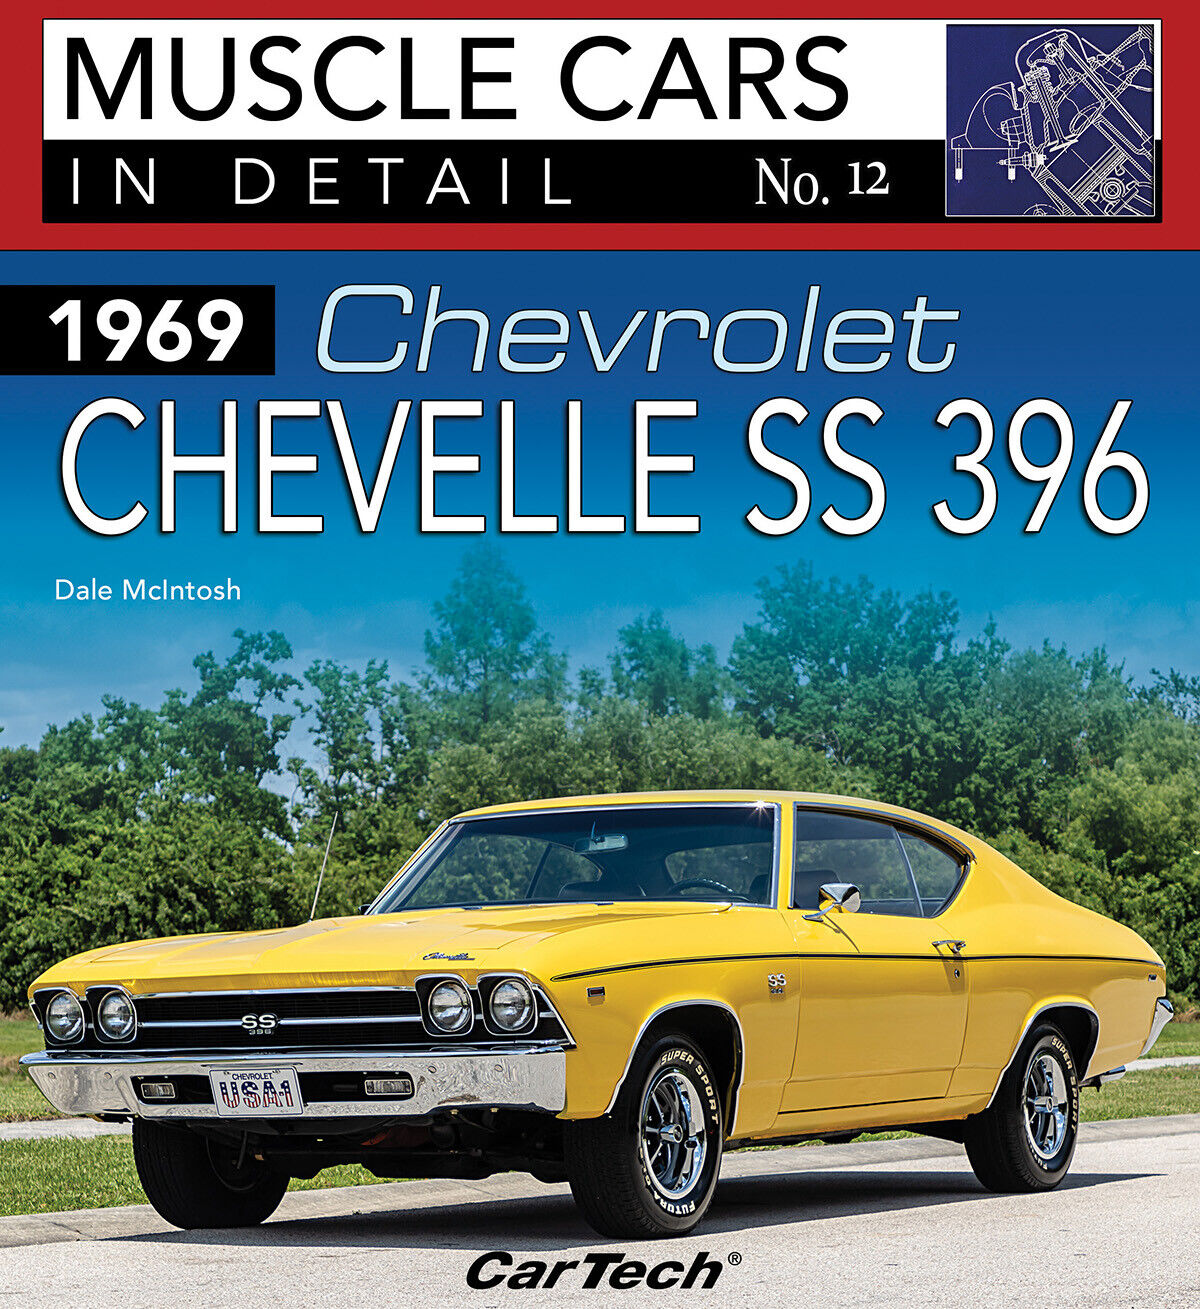 1969 Chevelle SS 396 Muscle Cars book Chevrolet